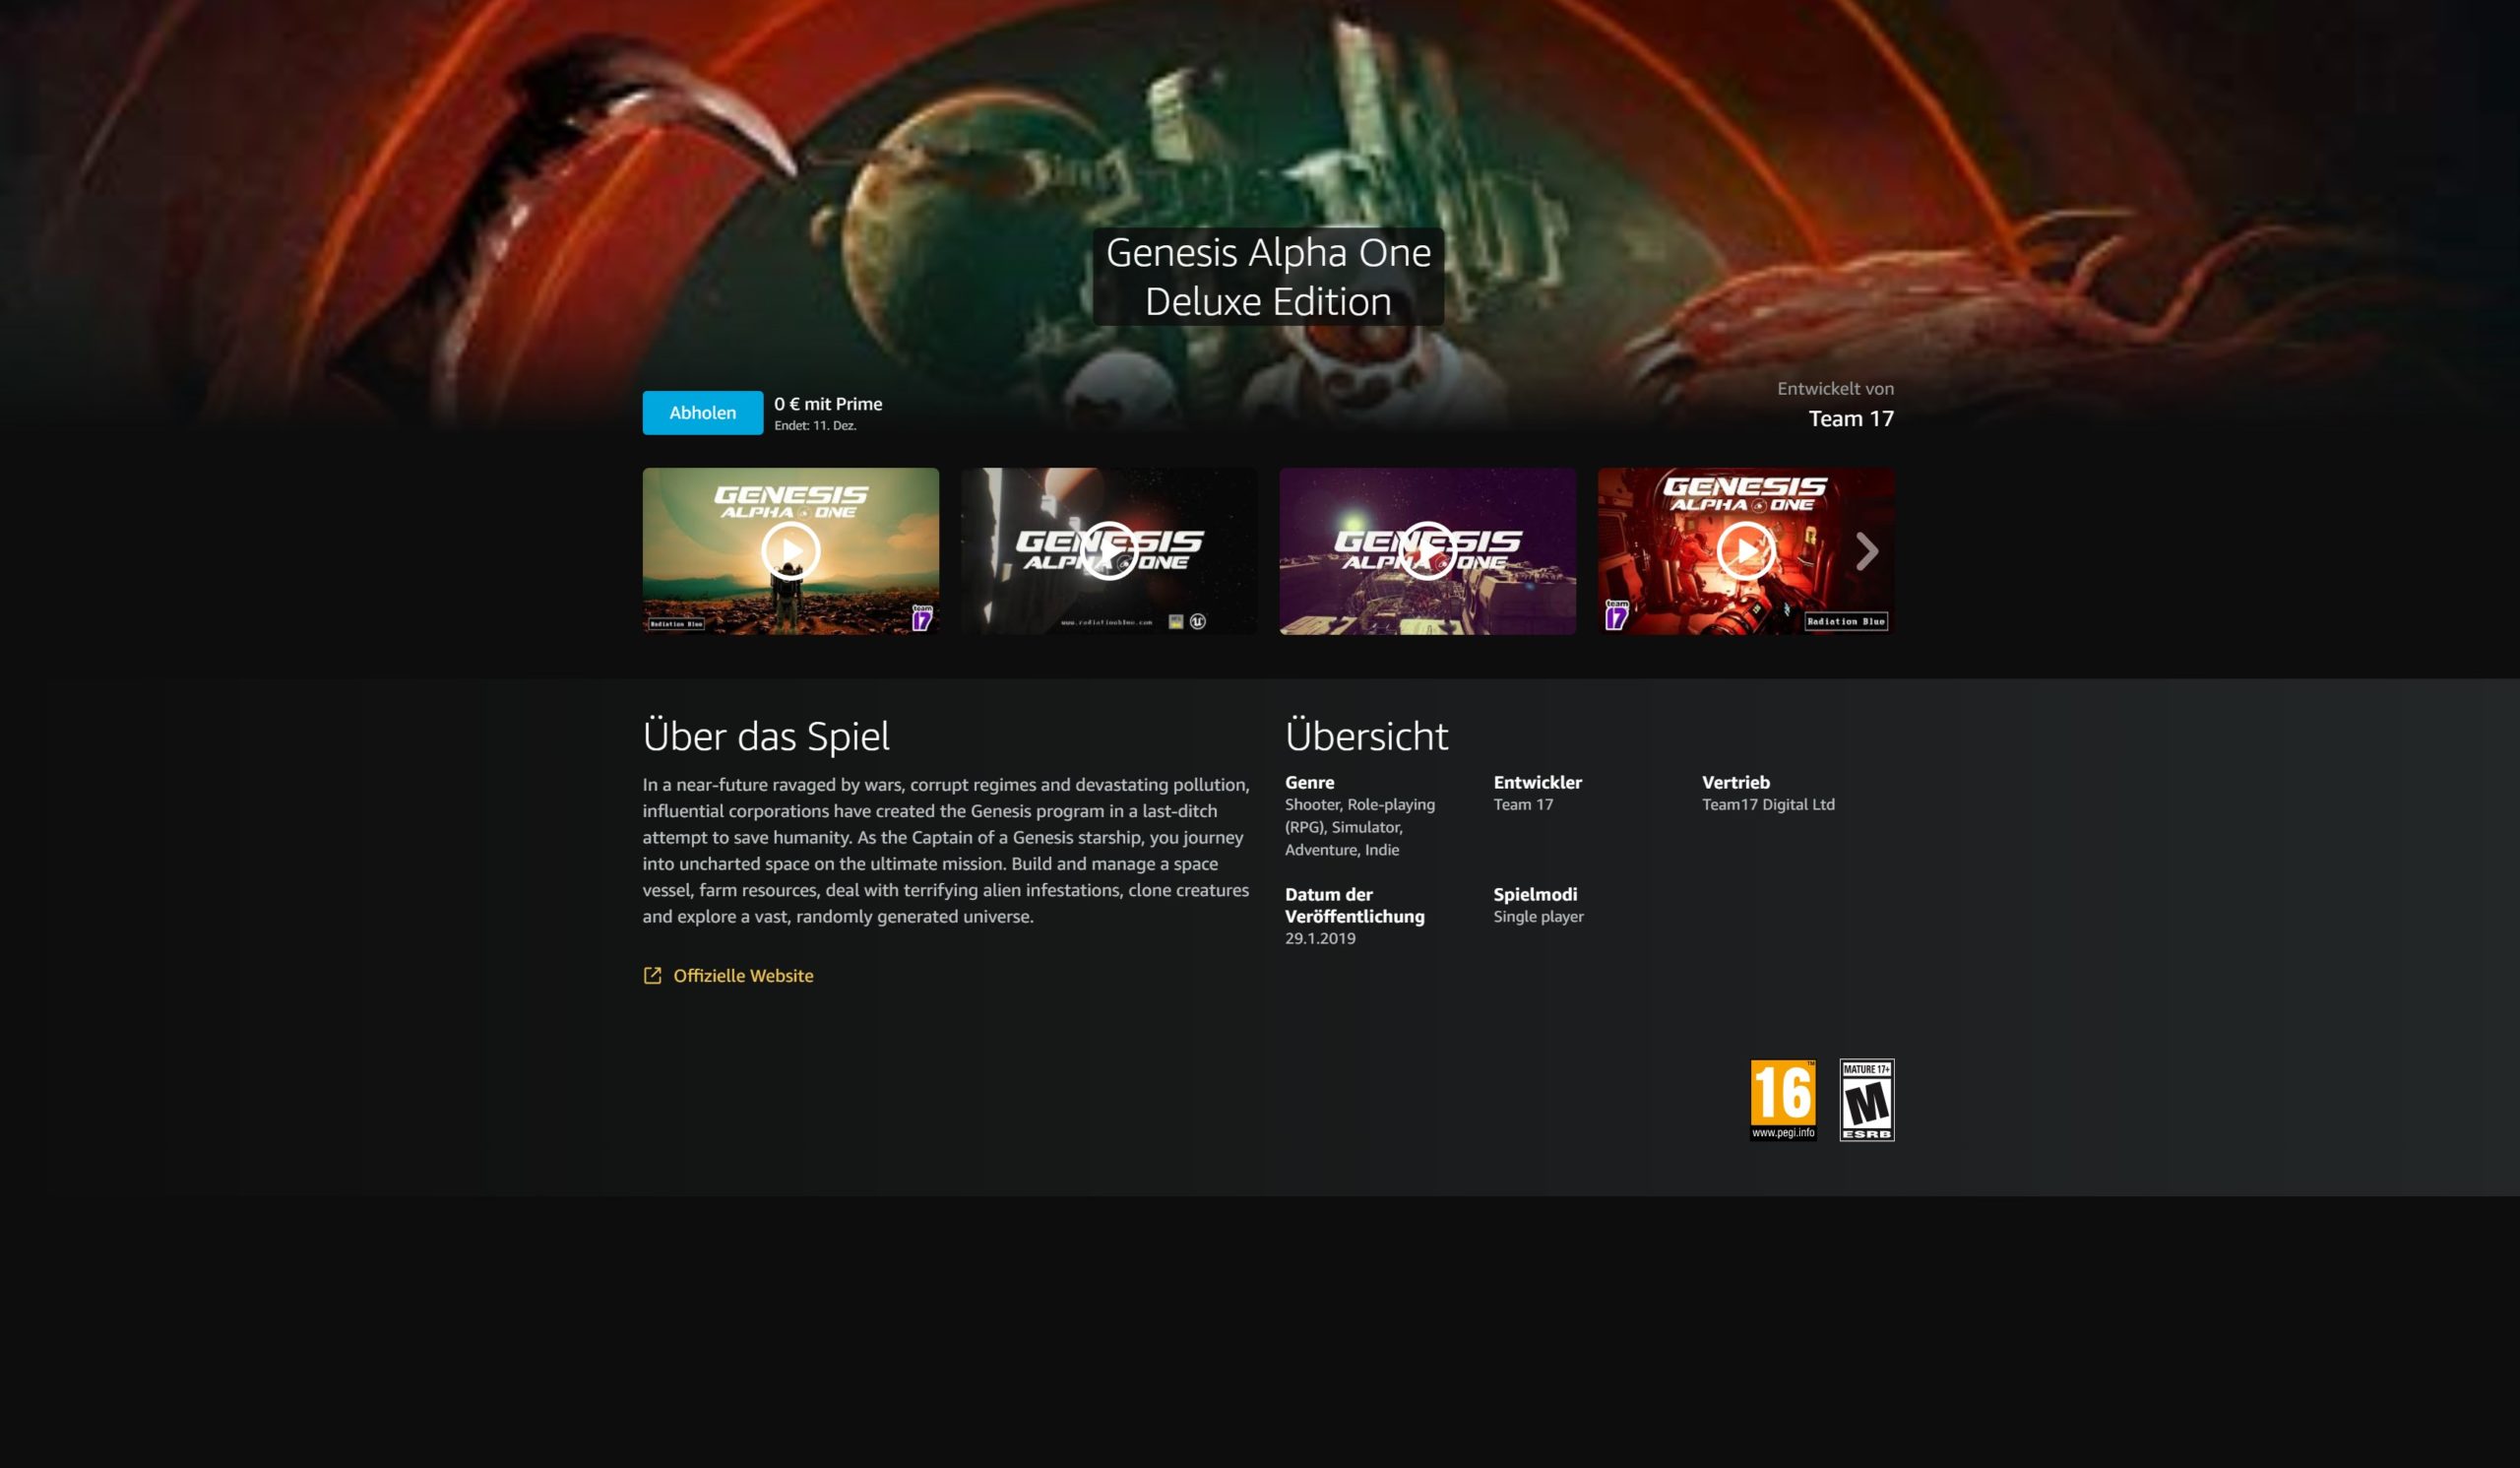 Twitch Prime Genesis Alpha One Deluxe Edition